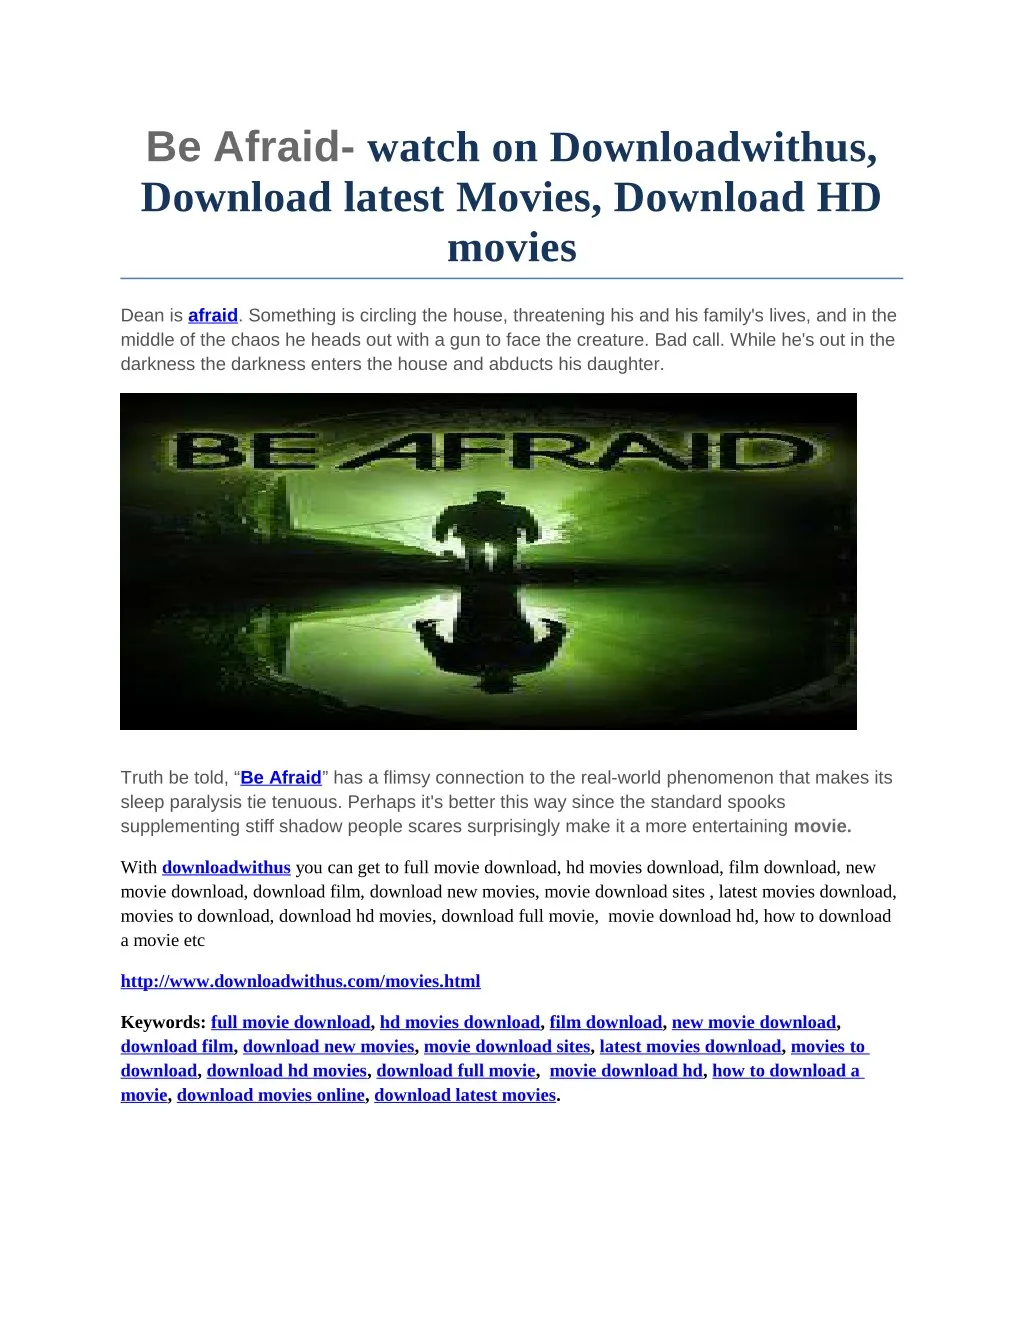 be afraid watch on downloadwithus download latest